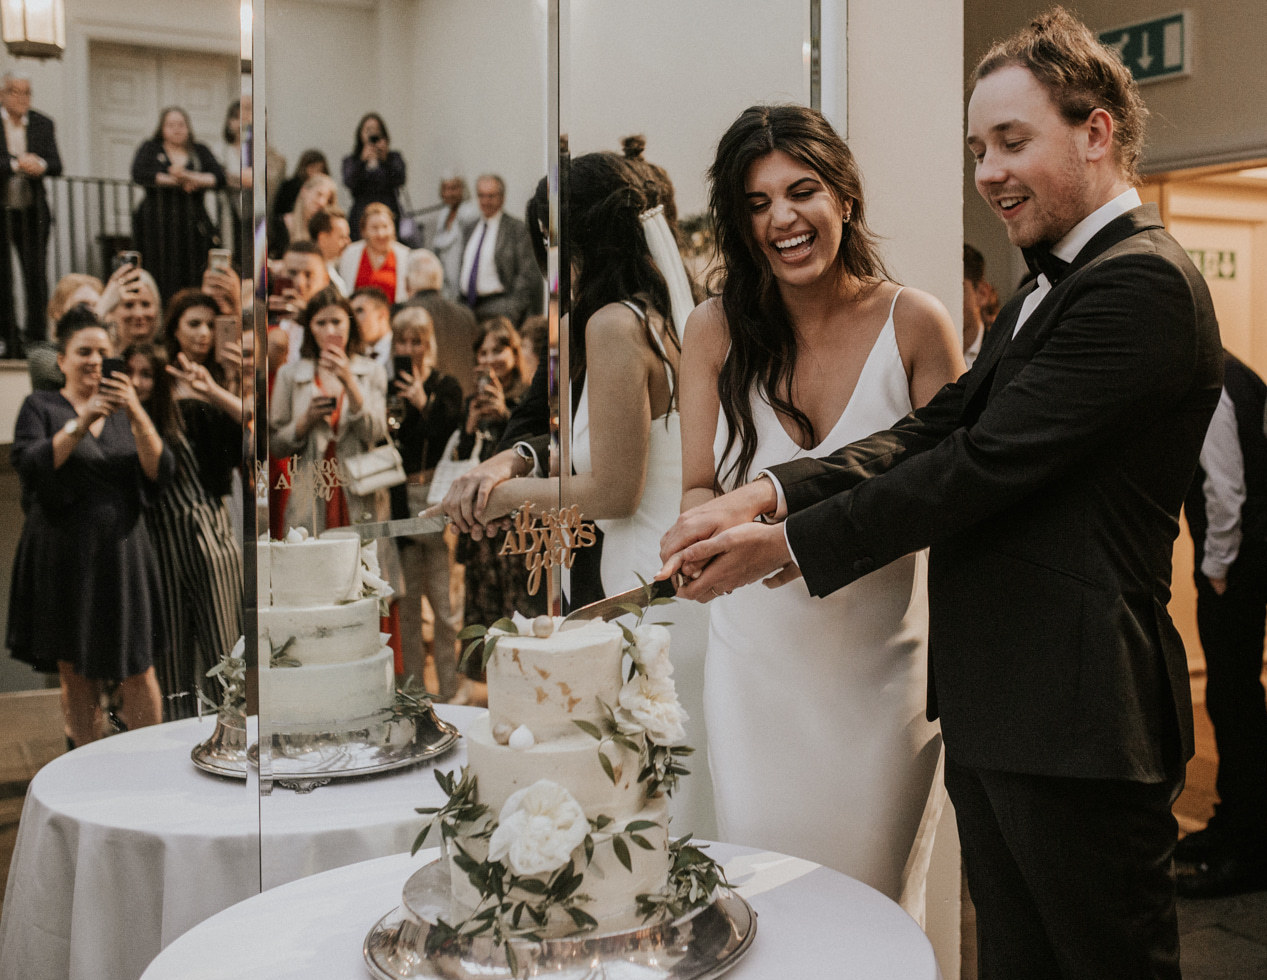 Cake cutting ceremony at Buxted Park Hotel, Sussex. Photo by Nataly J Photography